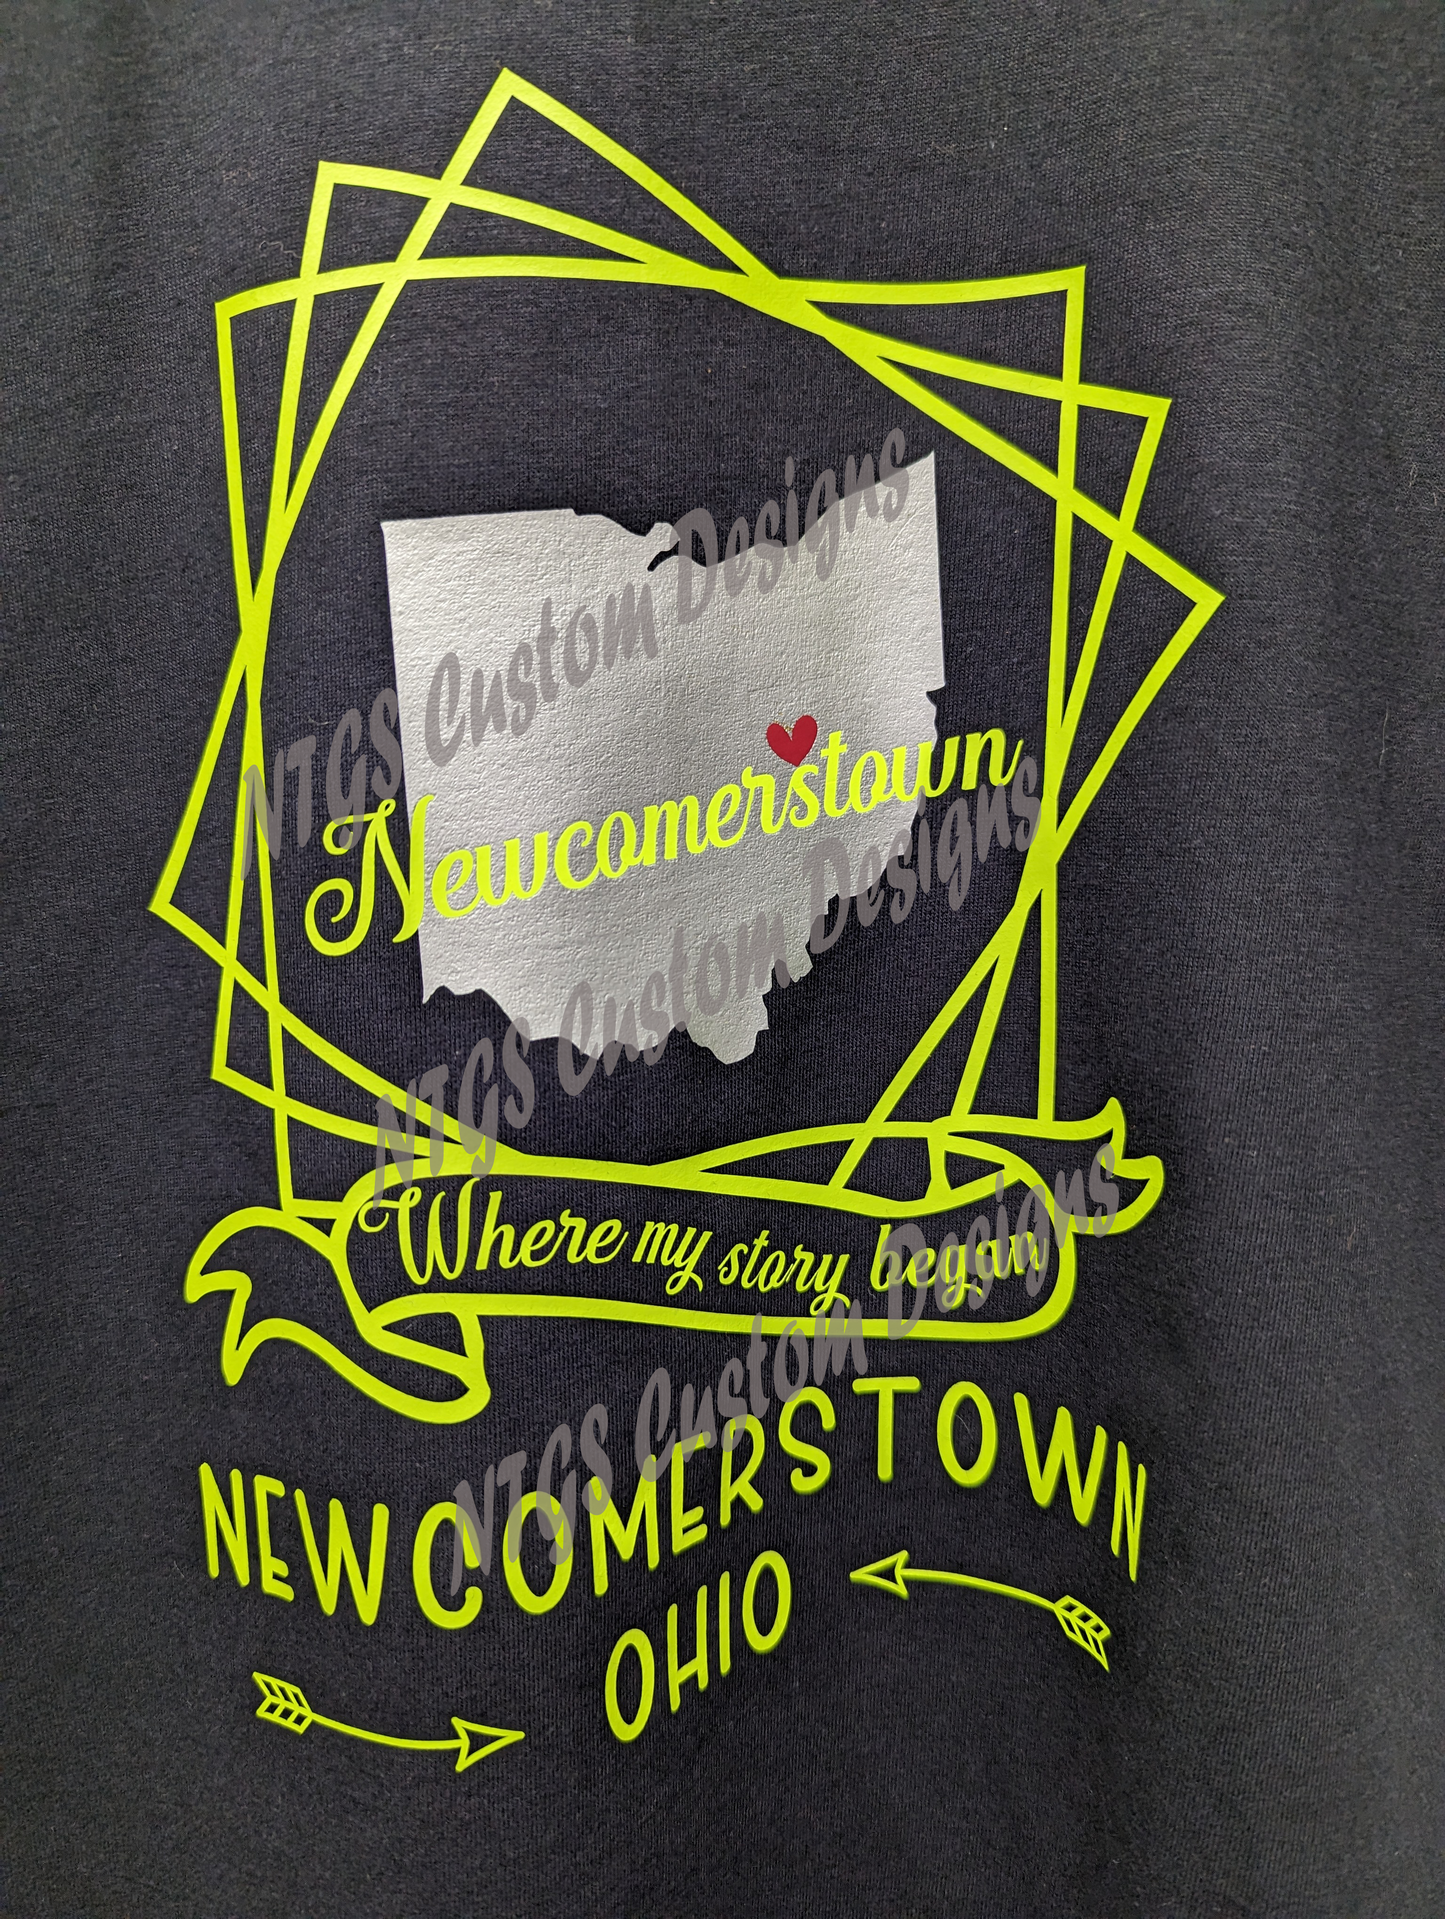 Newcomerstown-Where my story began-Blacktee with square design